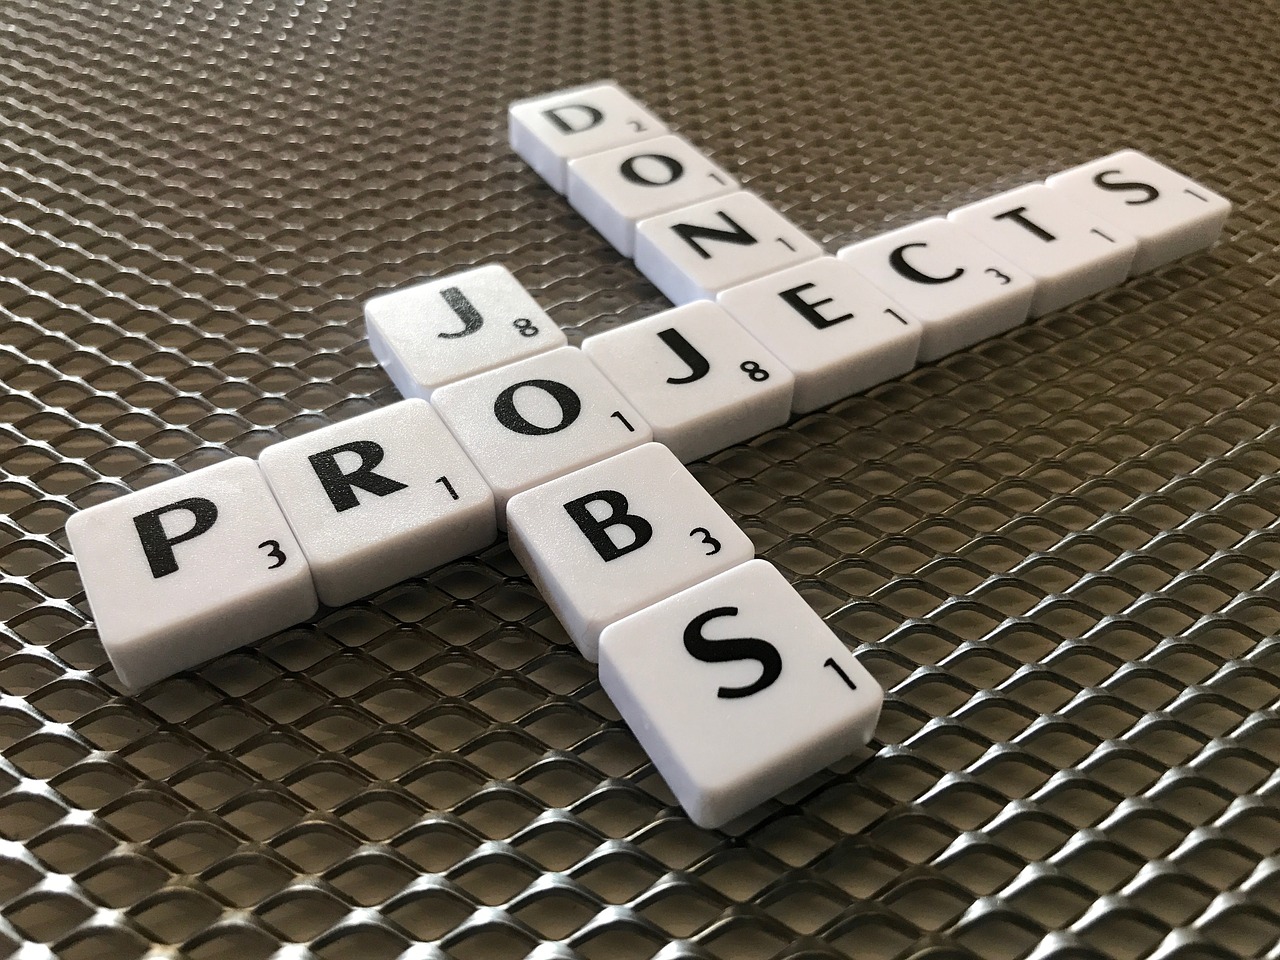 scrabble projects jobs free photo